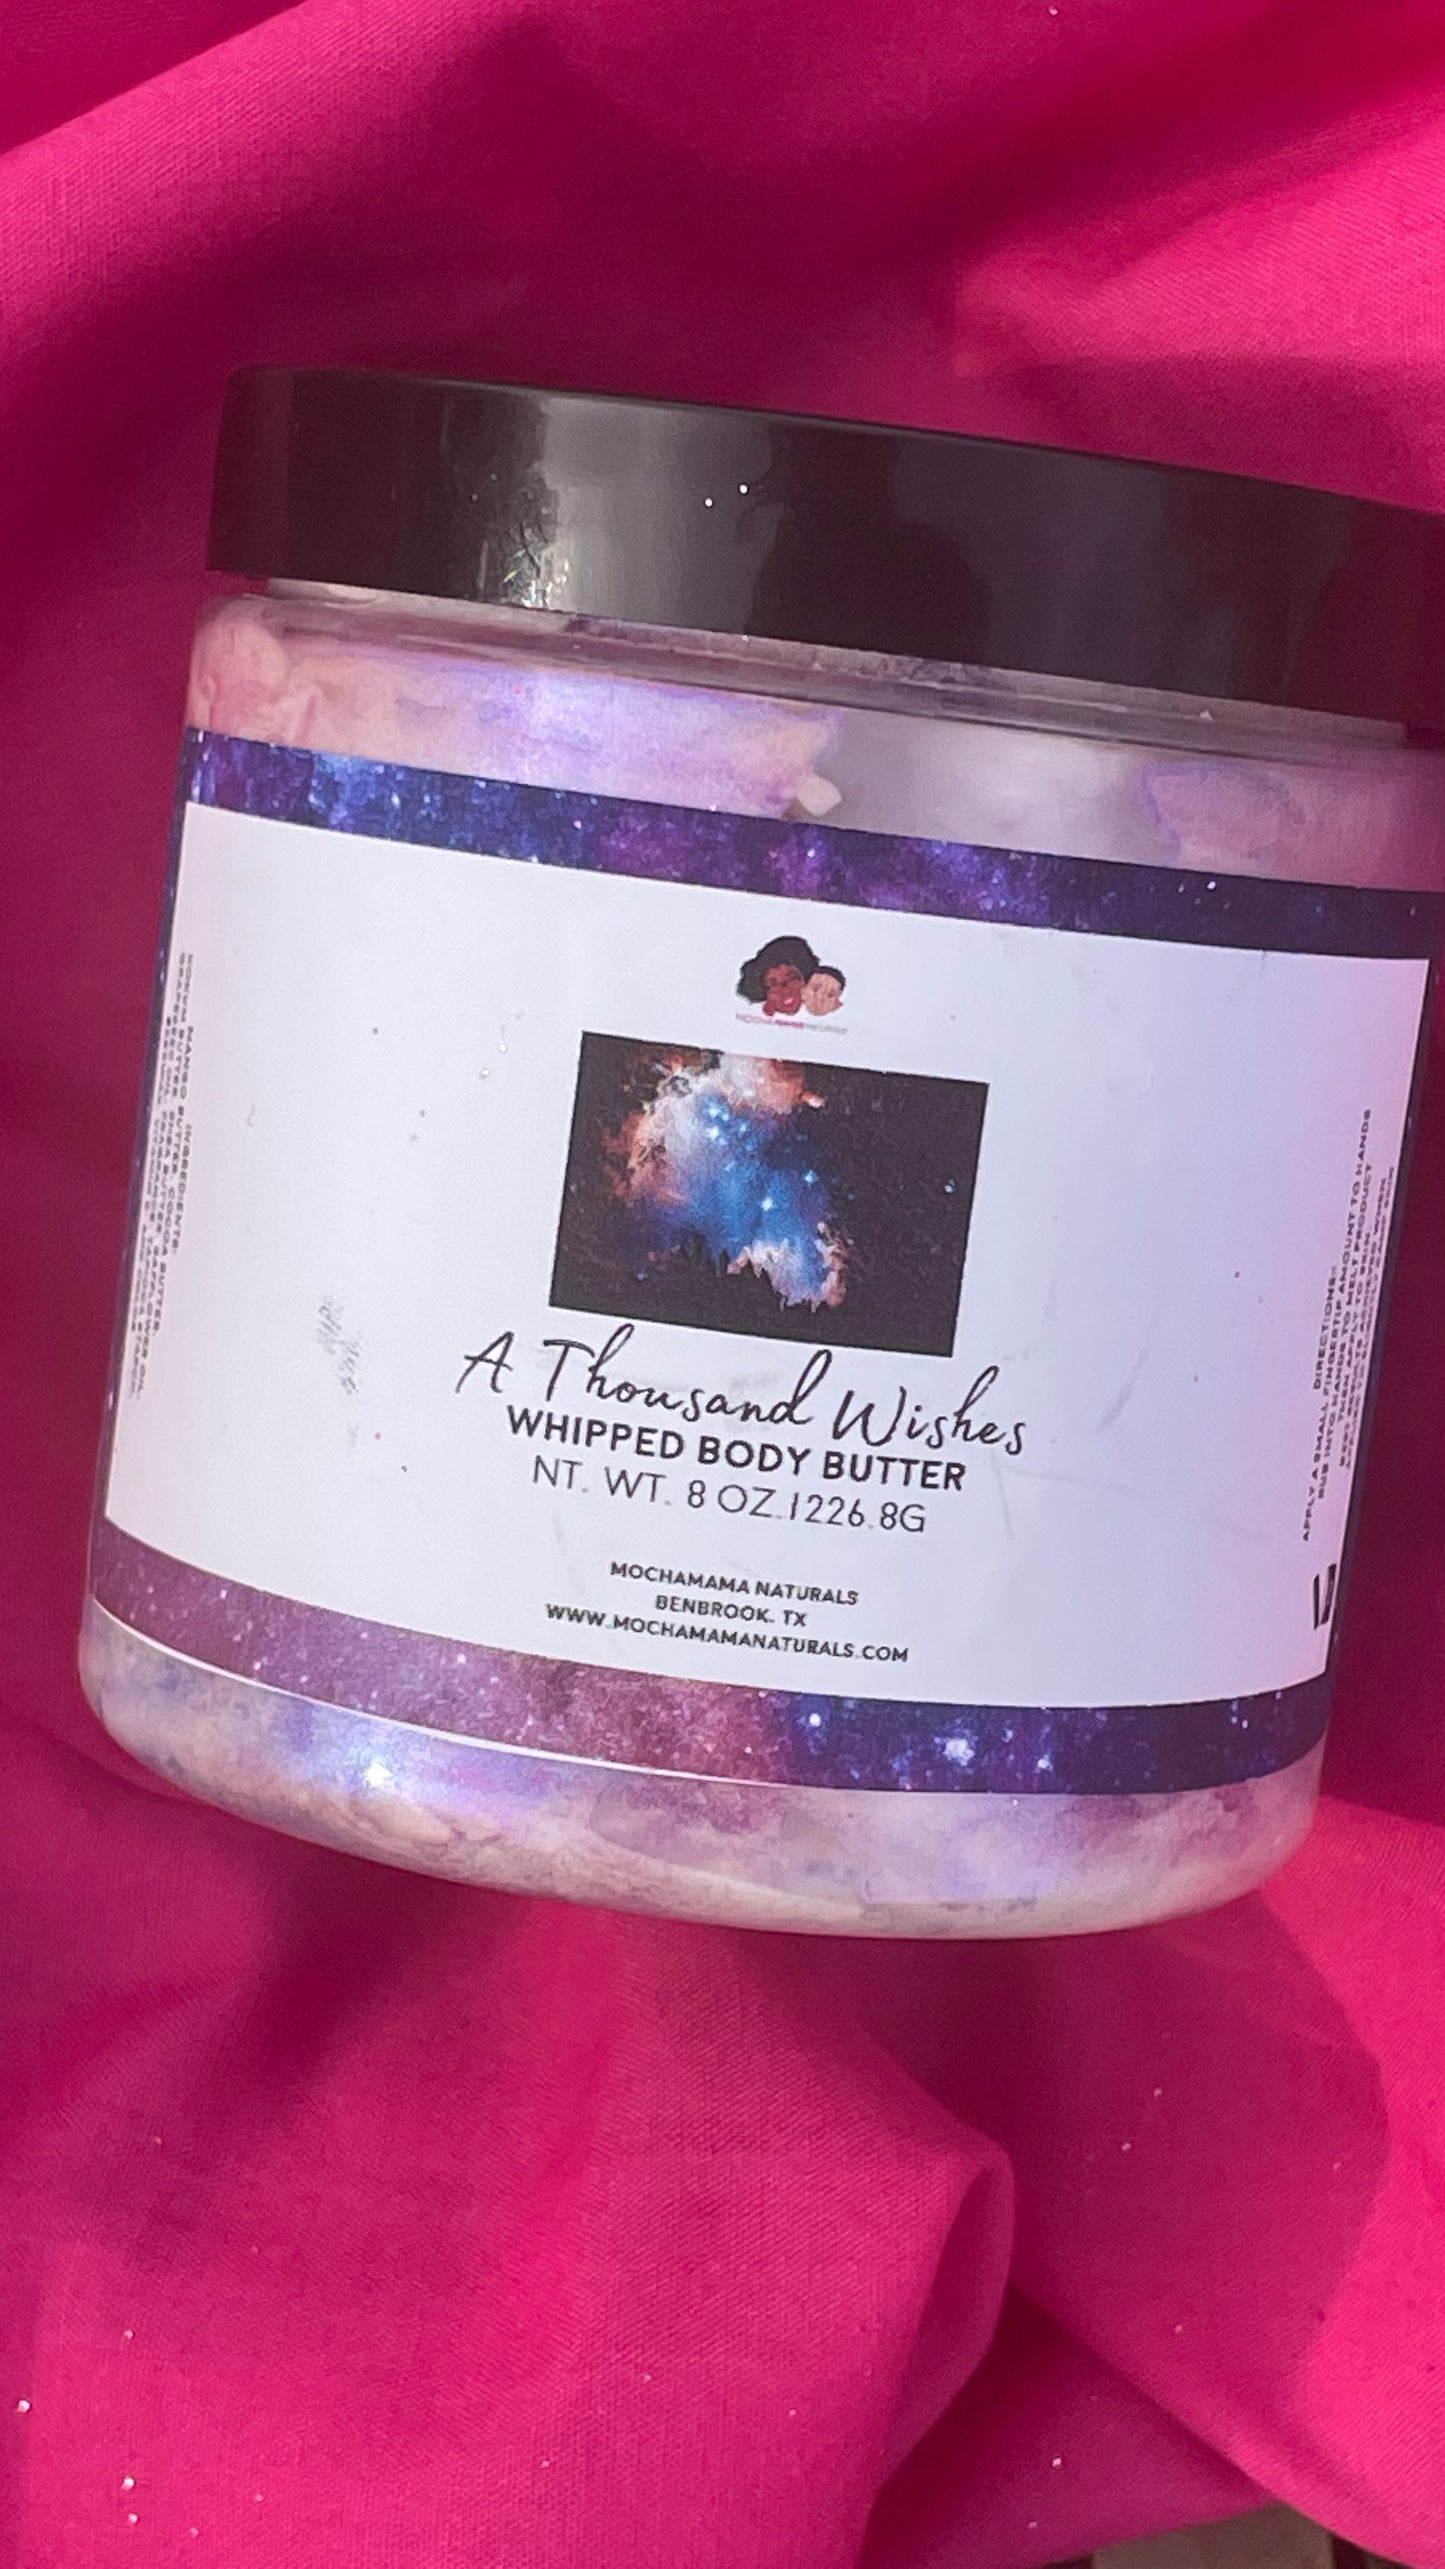 A Thousand Wishes Whipped Body Butter